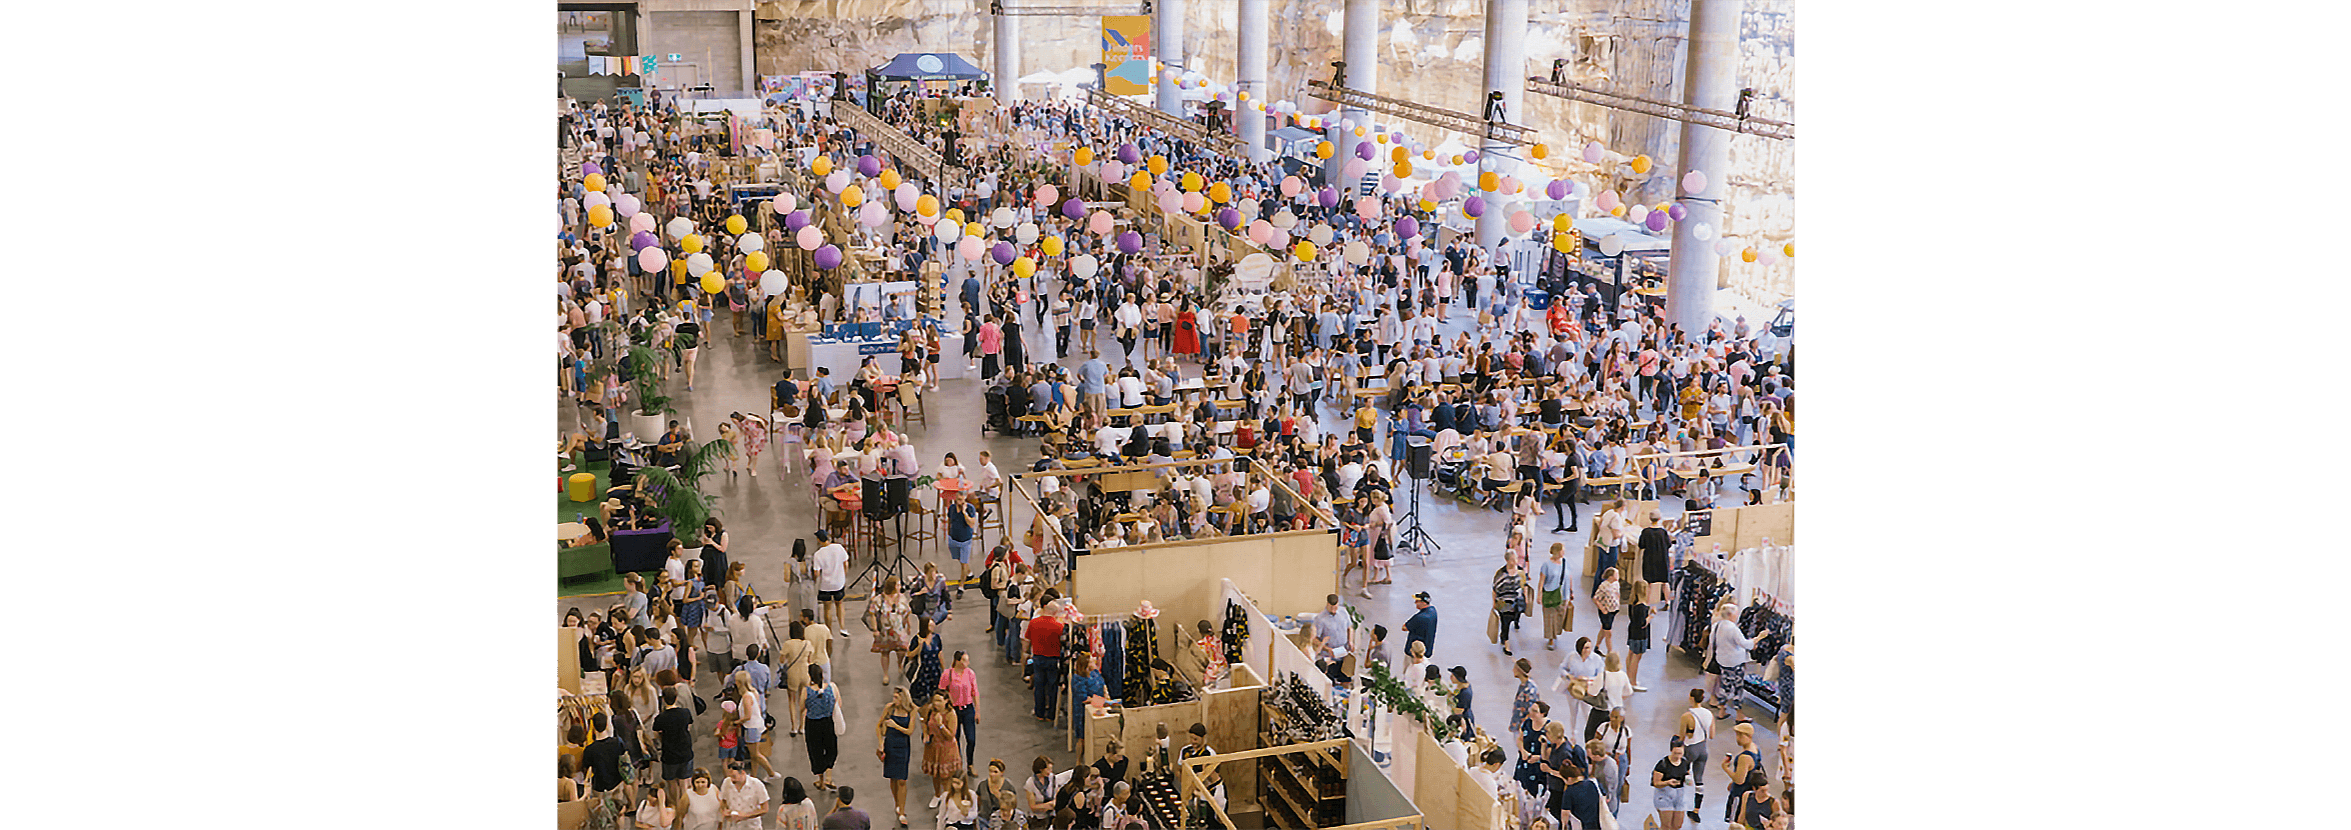 A large crowd of people peruse the stalls at an indoor charity fair.